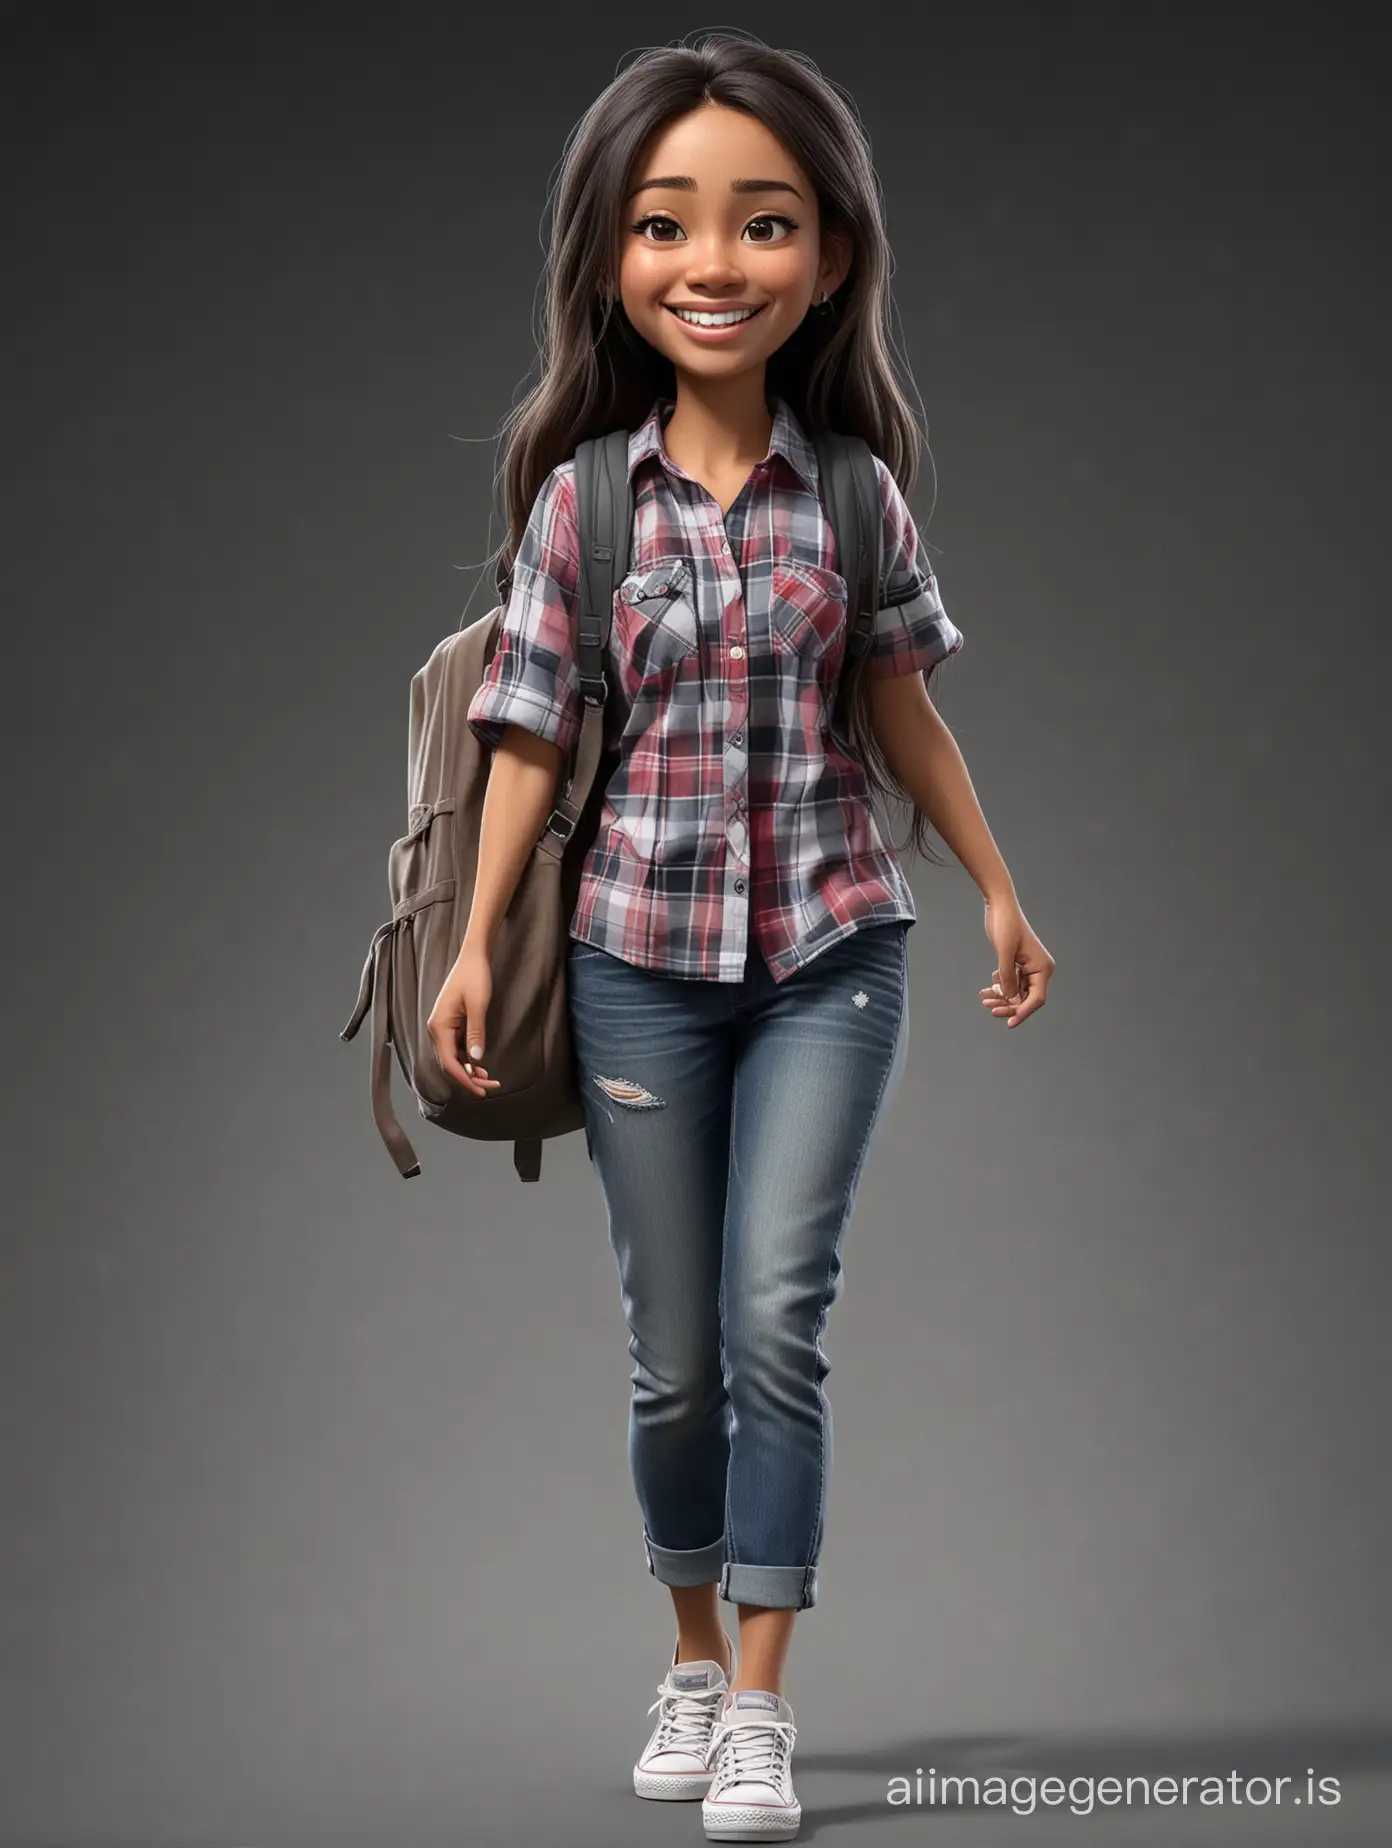 Caricature 4D Indonesian woman, 30 years old, long hair, thin face, clean face, carrying ransel,wearing an unbuttoned t-shirt and flannel shirt,converse shoe, walking in station with happy face, making the hello gesture, black background, detailed image, detailed visuals, looks real, HD